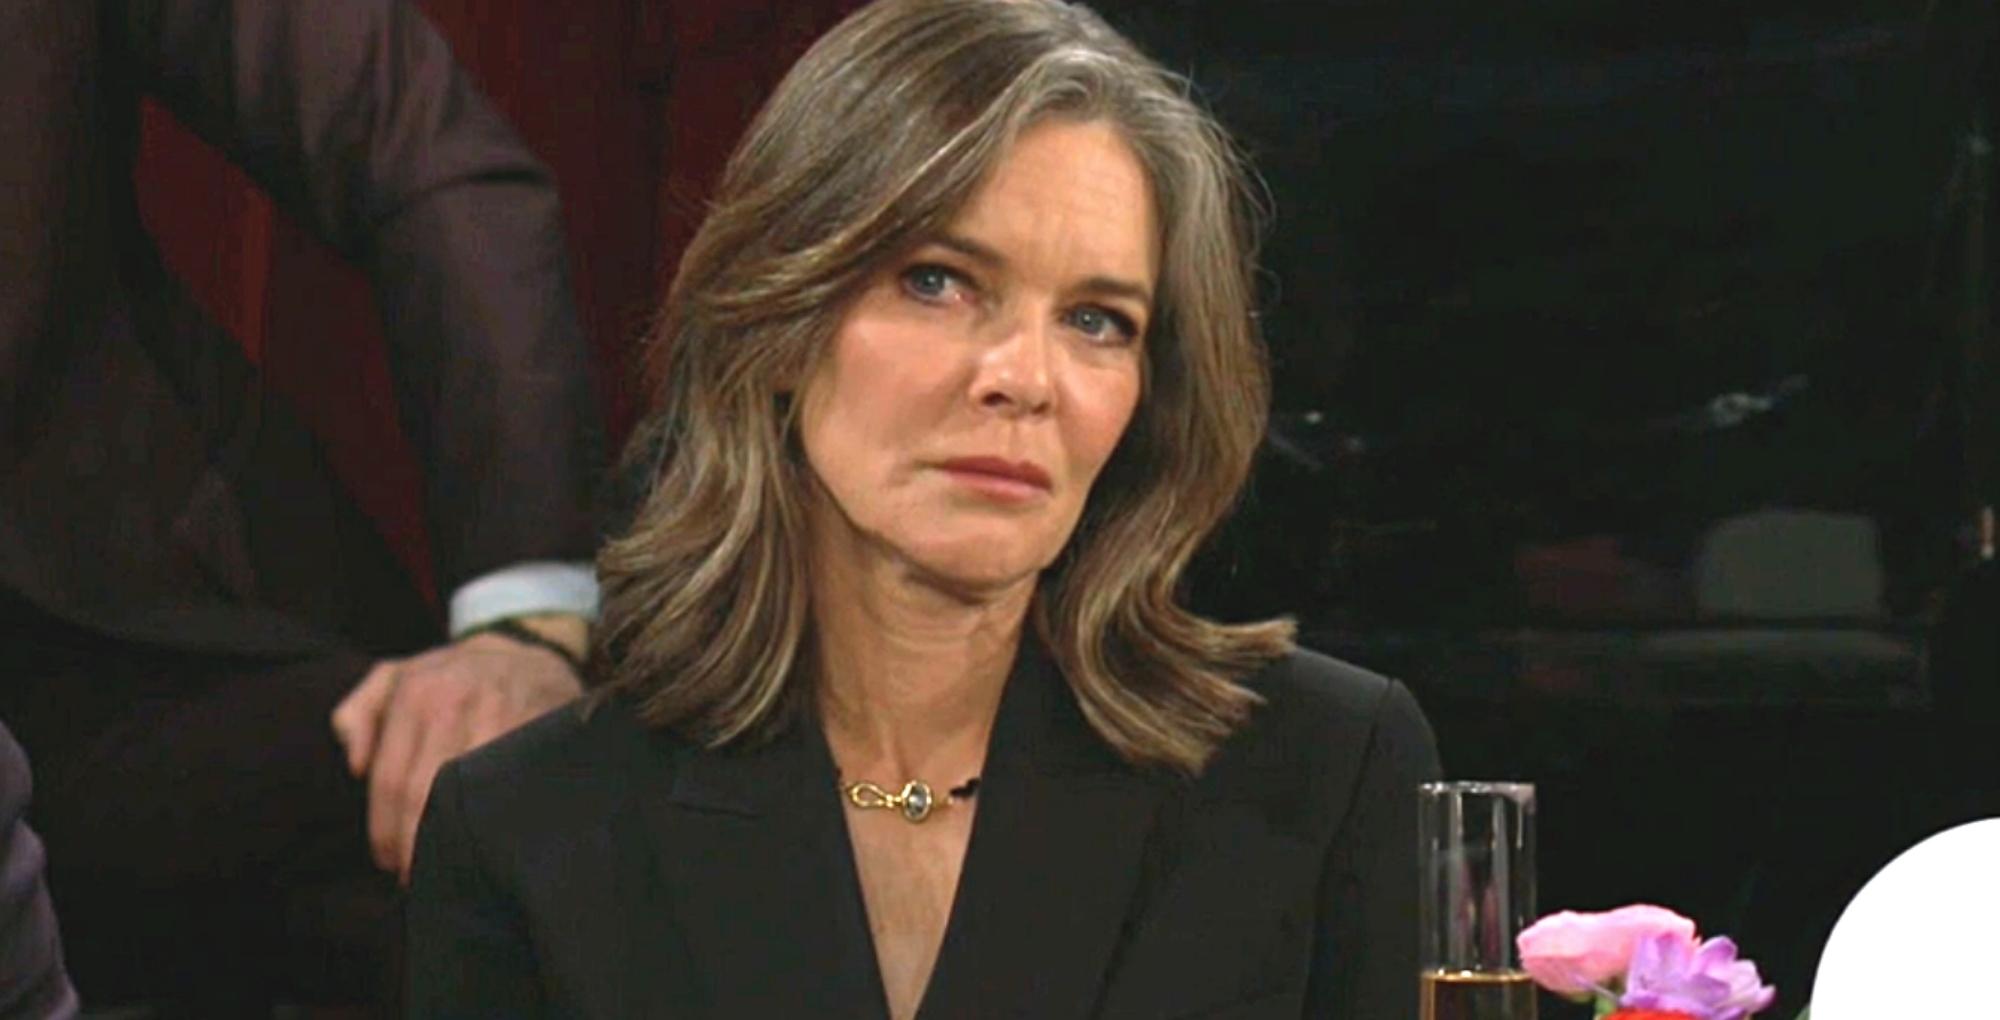 the young and the restless spoilers for june 26, 2023, have diane jenkins looking suspect.